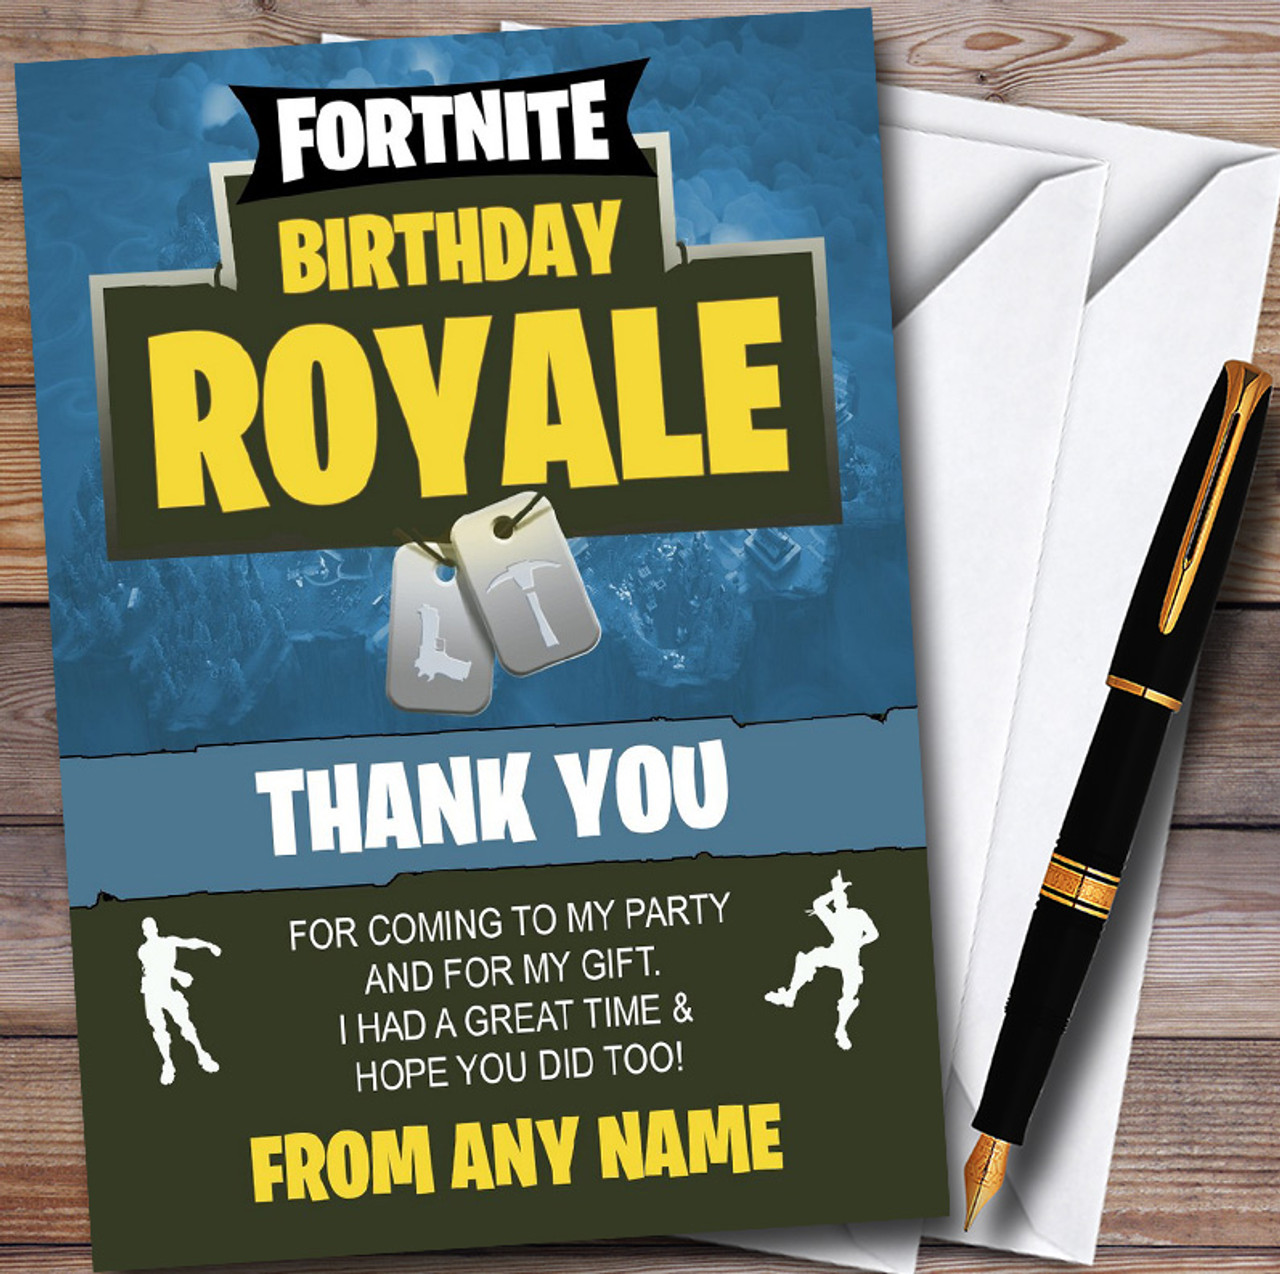 Fortnite Birthday Royale Personalized Children S Birthday Party Thank You Cards Red Heart Print - free printable roblox thank you cards birthday card